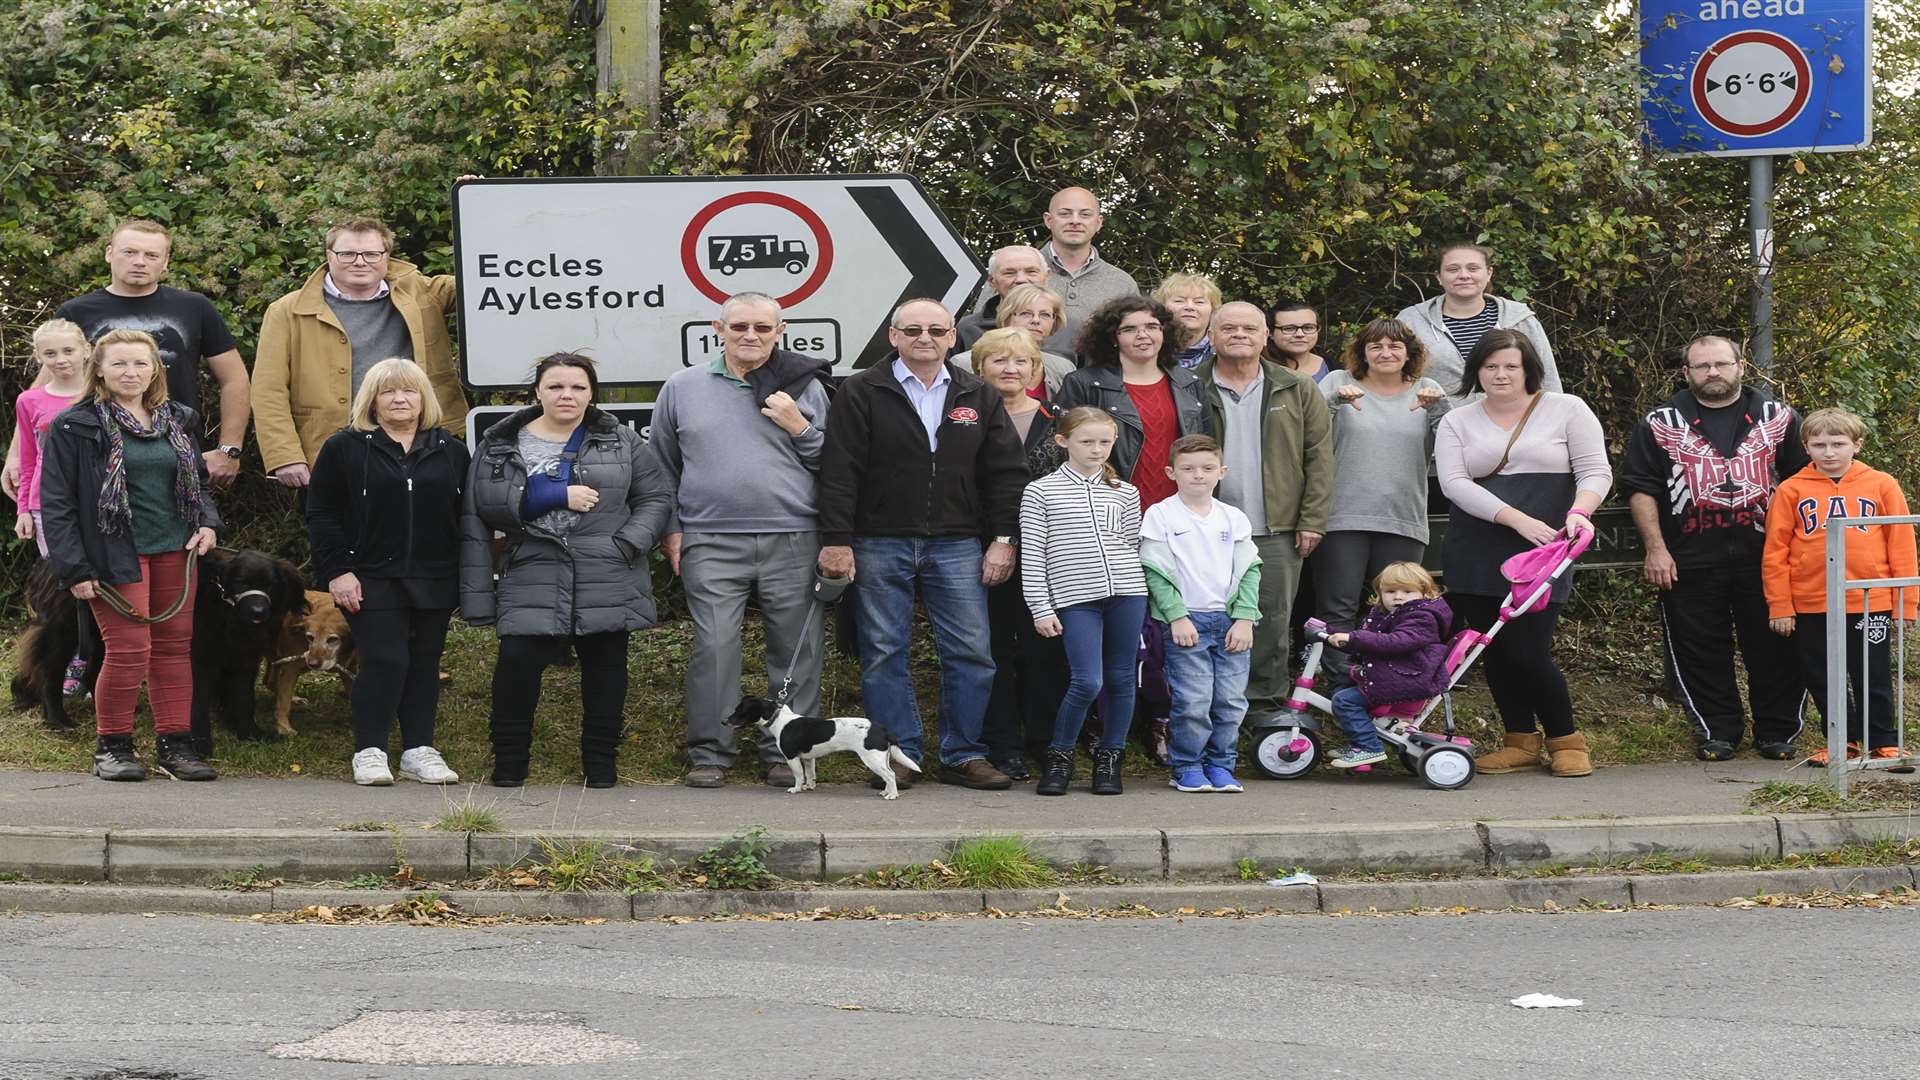 Residents have started a petition to improve safety at the junction of Bull Lane and Pilgrims Way.